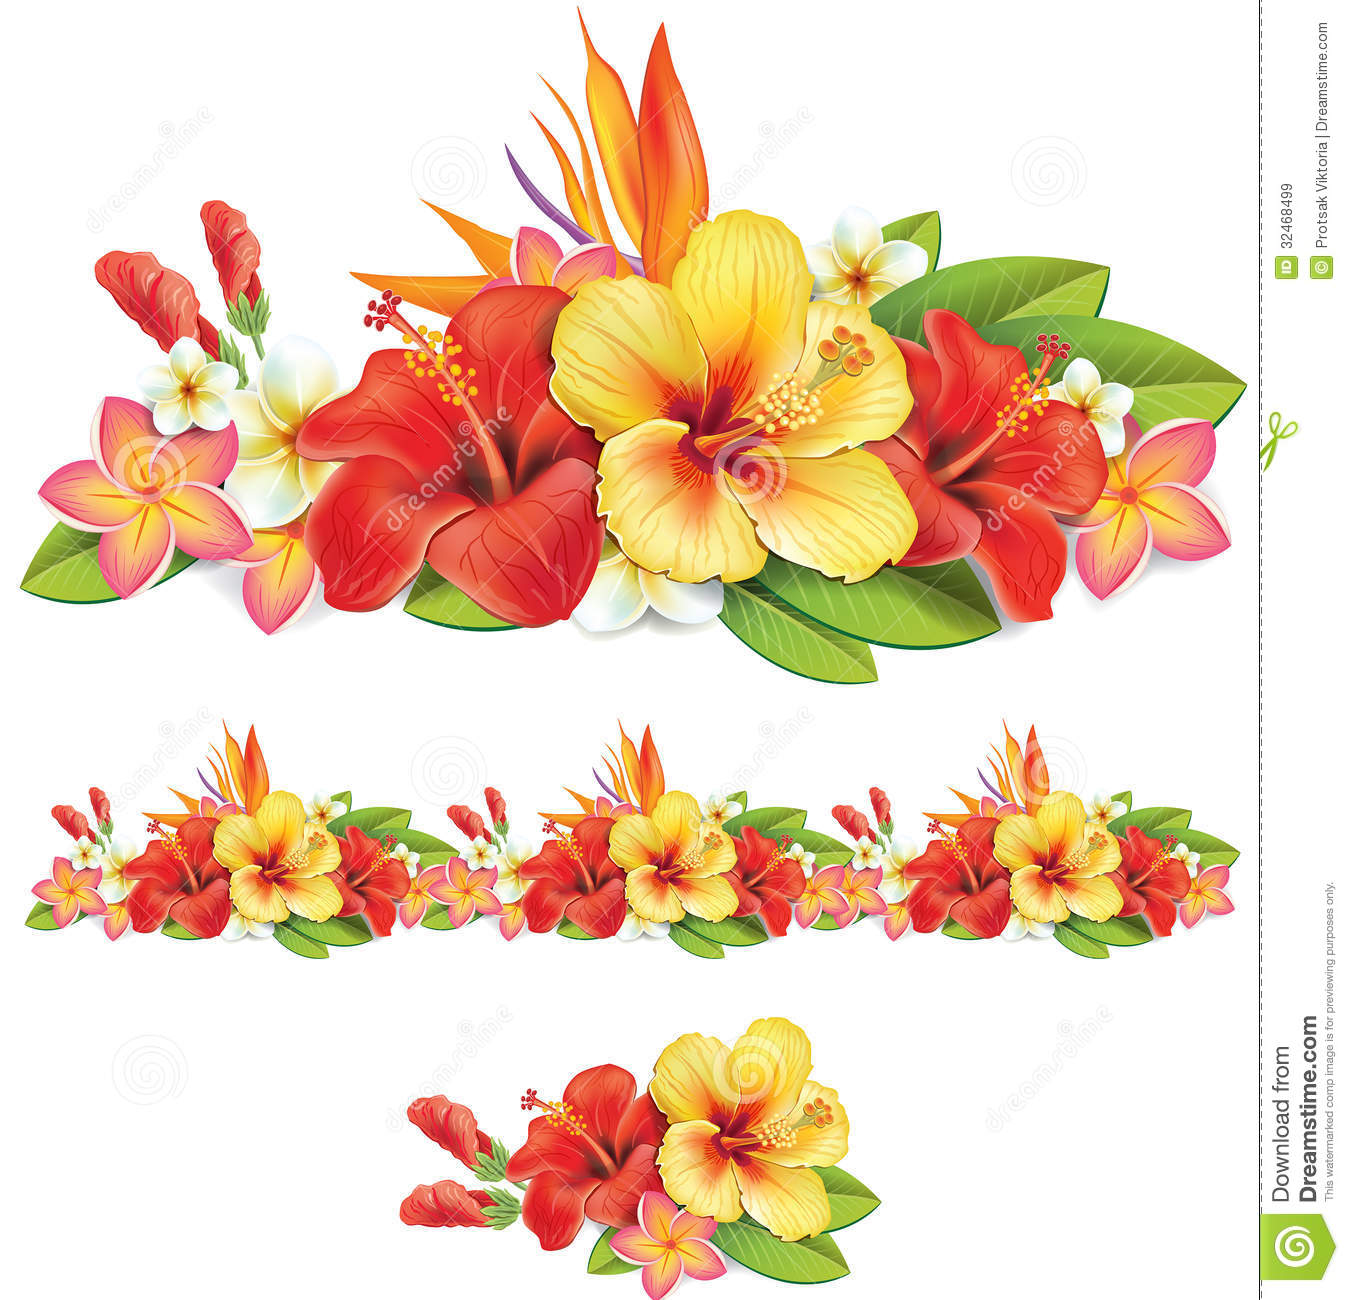 Garland Of Tropical Flowers Royalty Free Stock Images   Image    